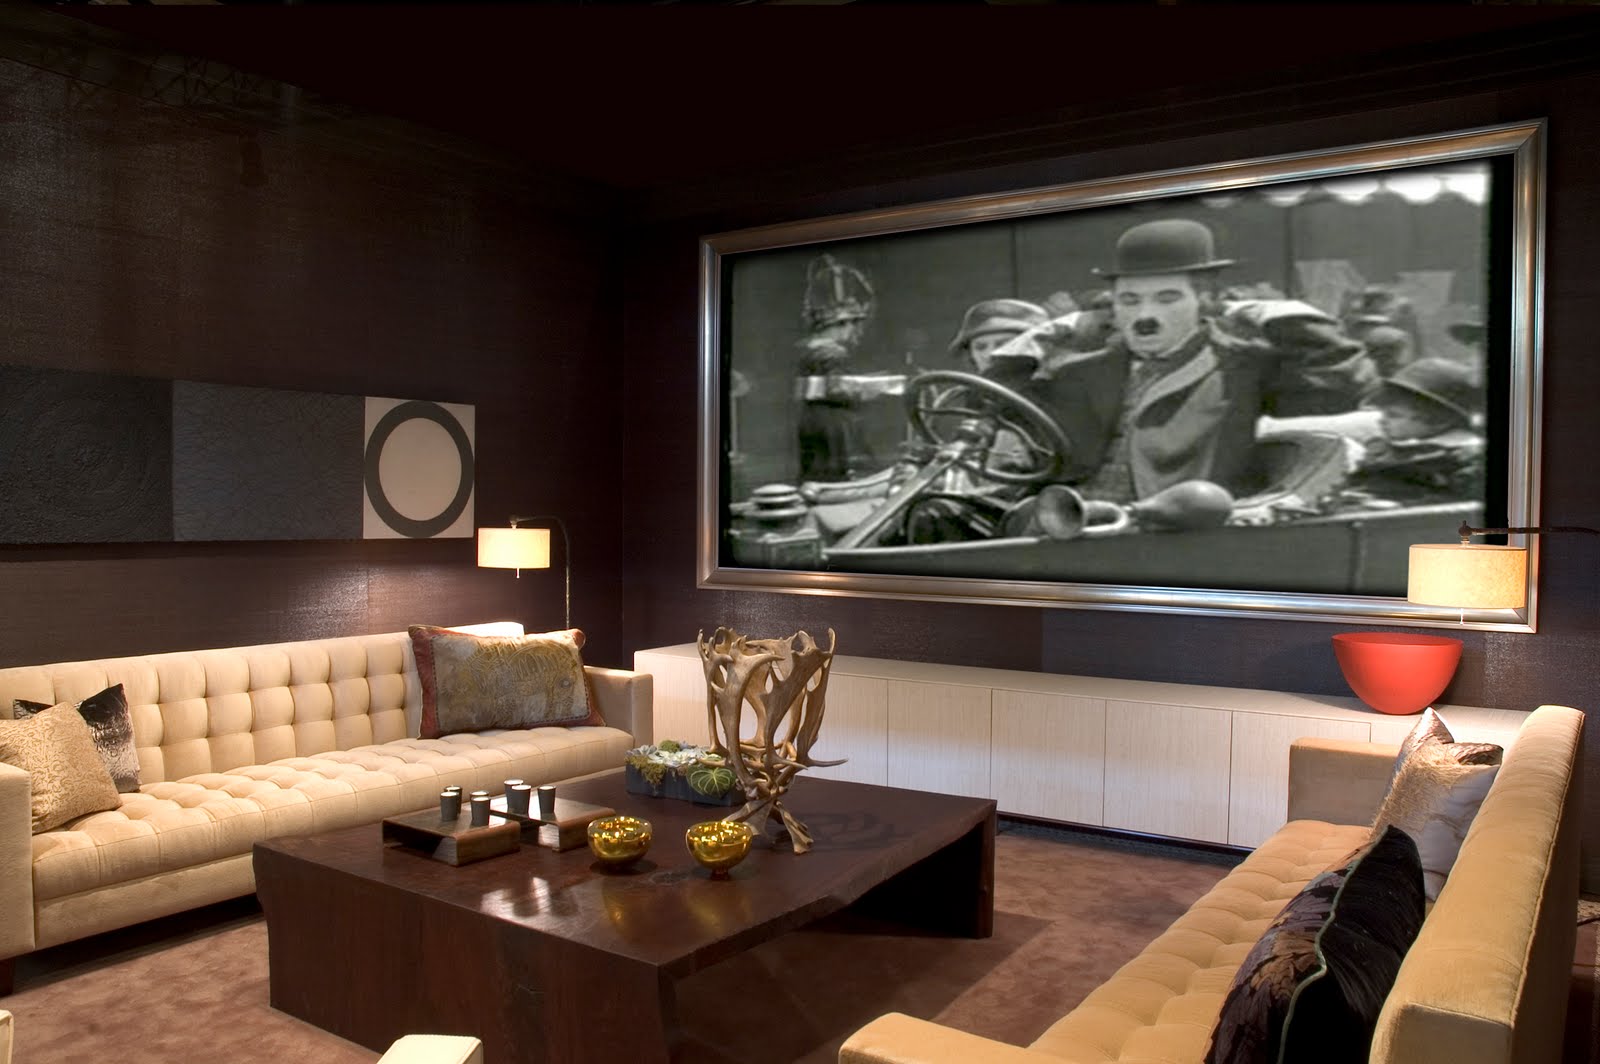 Media Room Two Wonderful Media Room Ideas With Two Couches Coffee Table Wooden Walls And Big Flat Screened TV Decoration Decorative Media Room Ideas In Contemporary Design